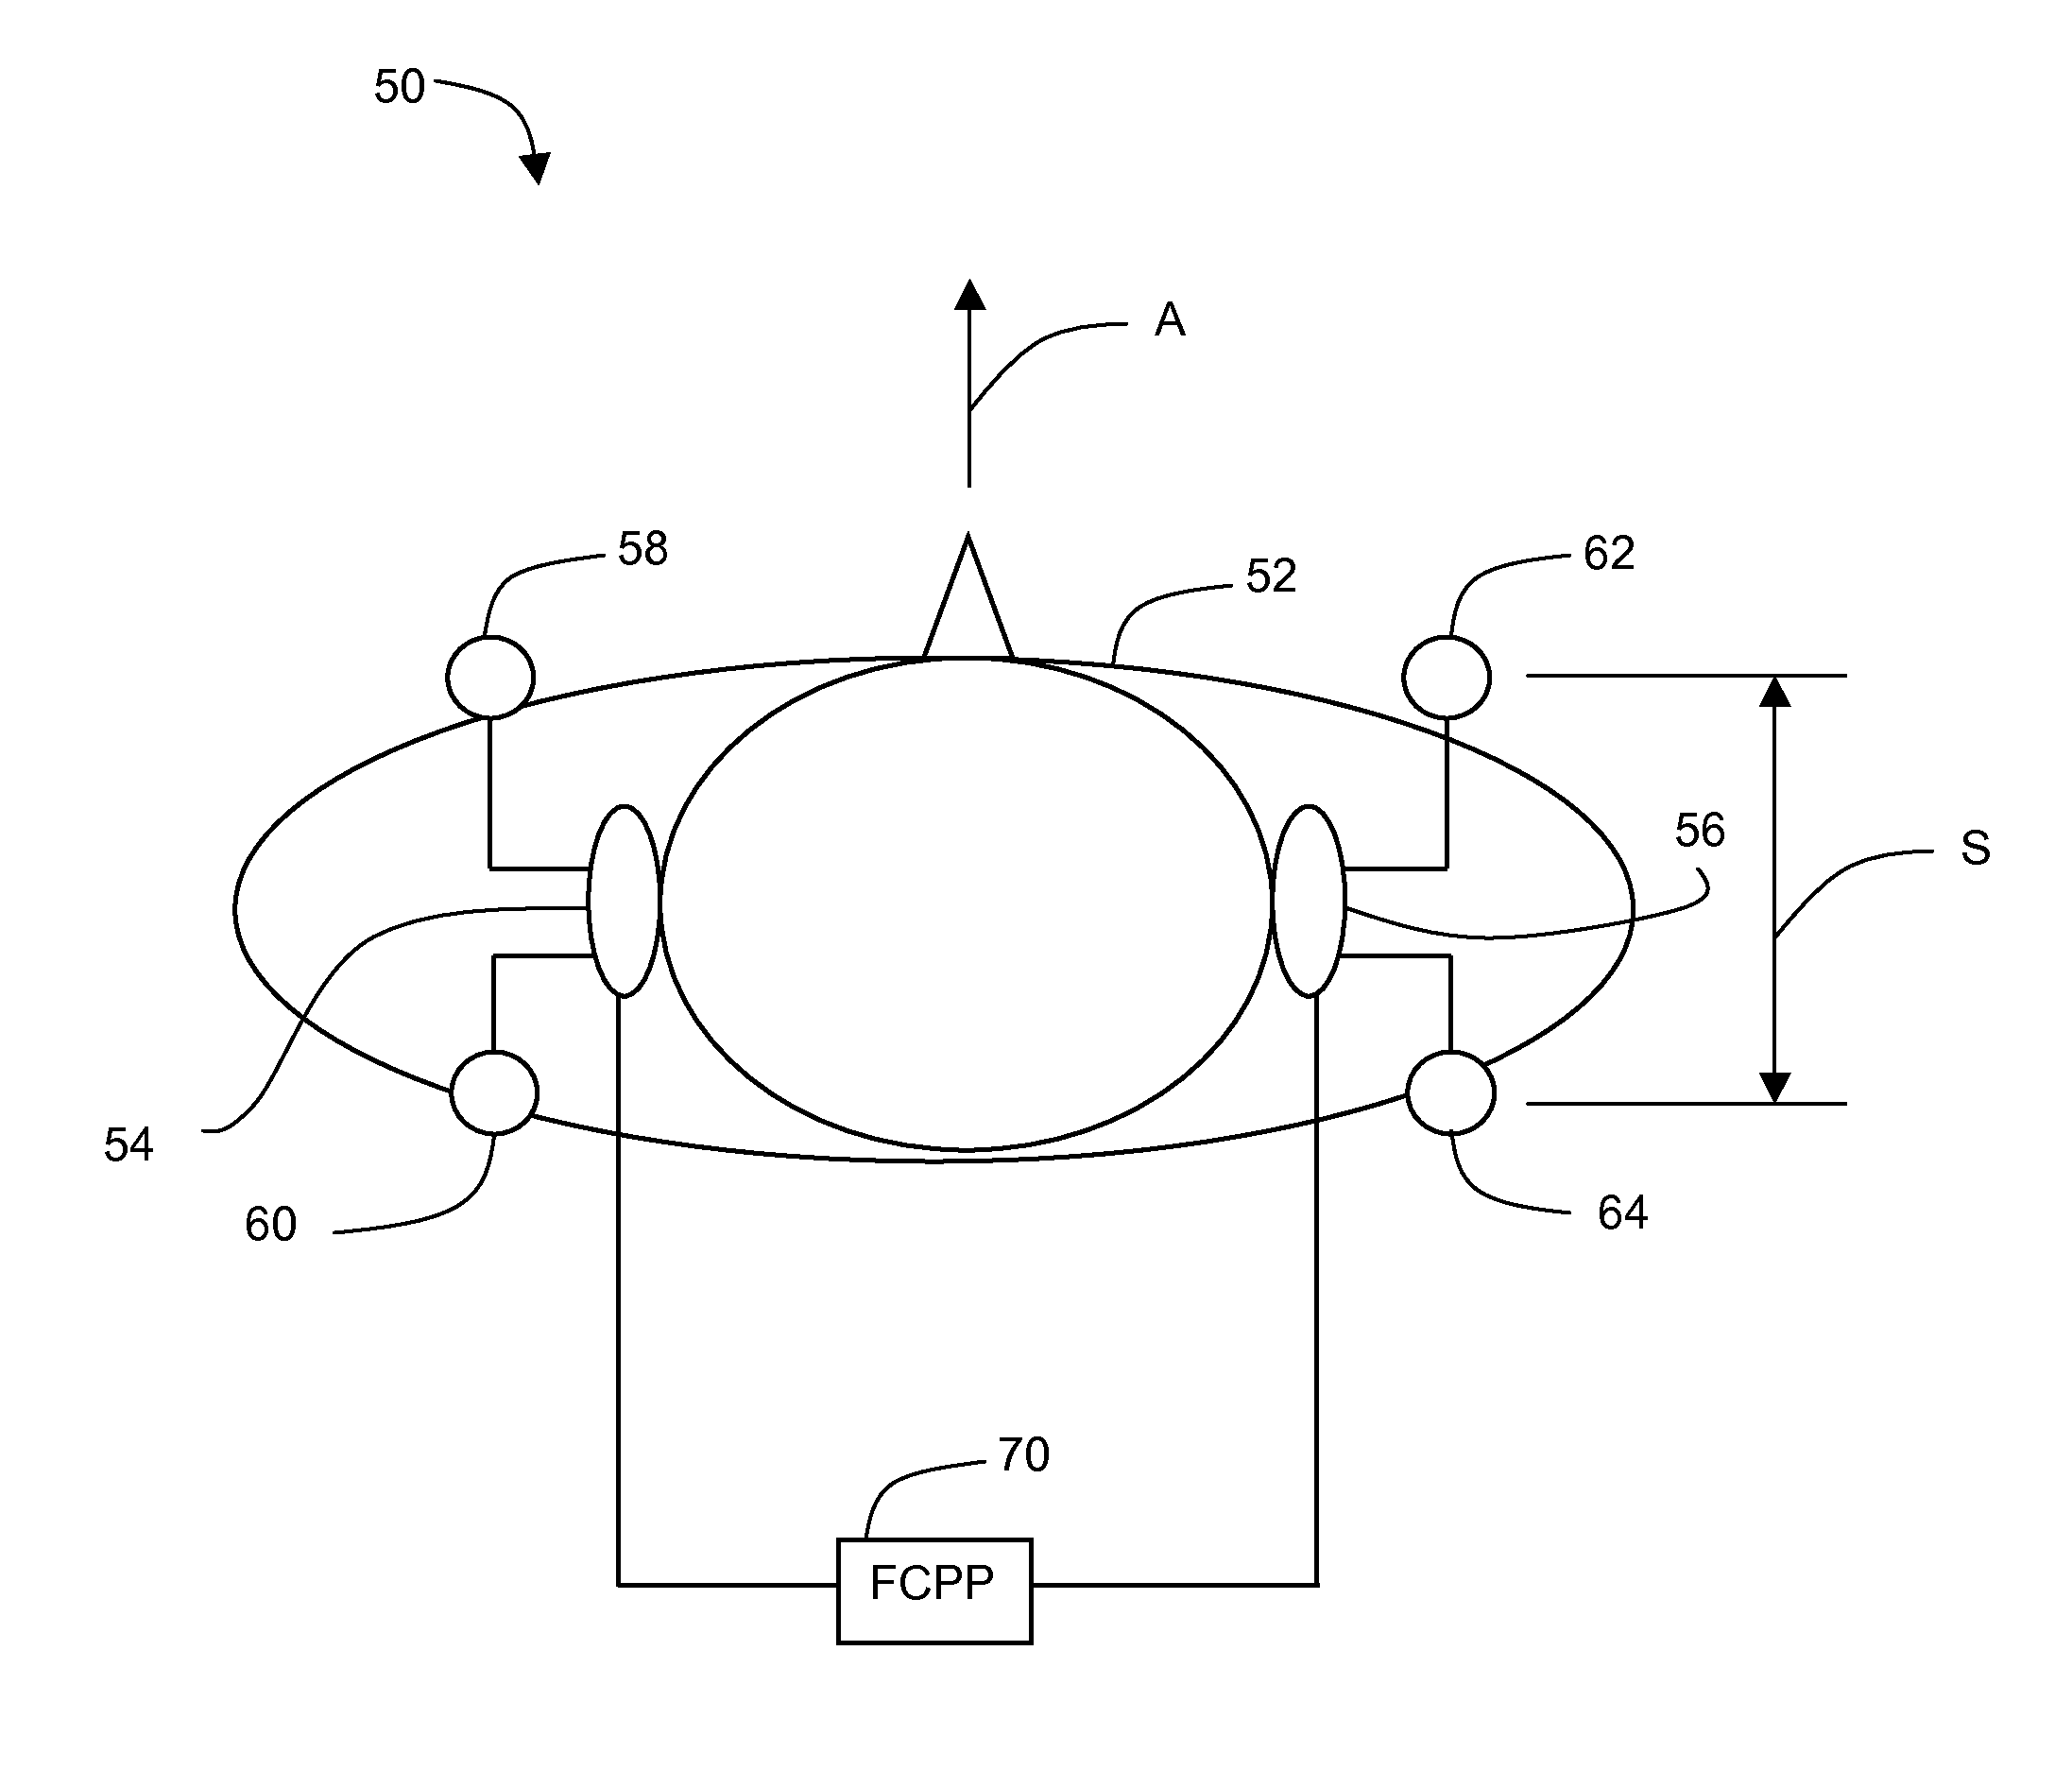 Apparatus, systems and methods for binaural hearing enhancement in auditory processing systems